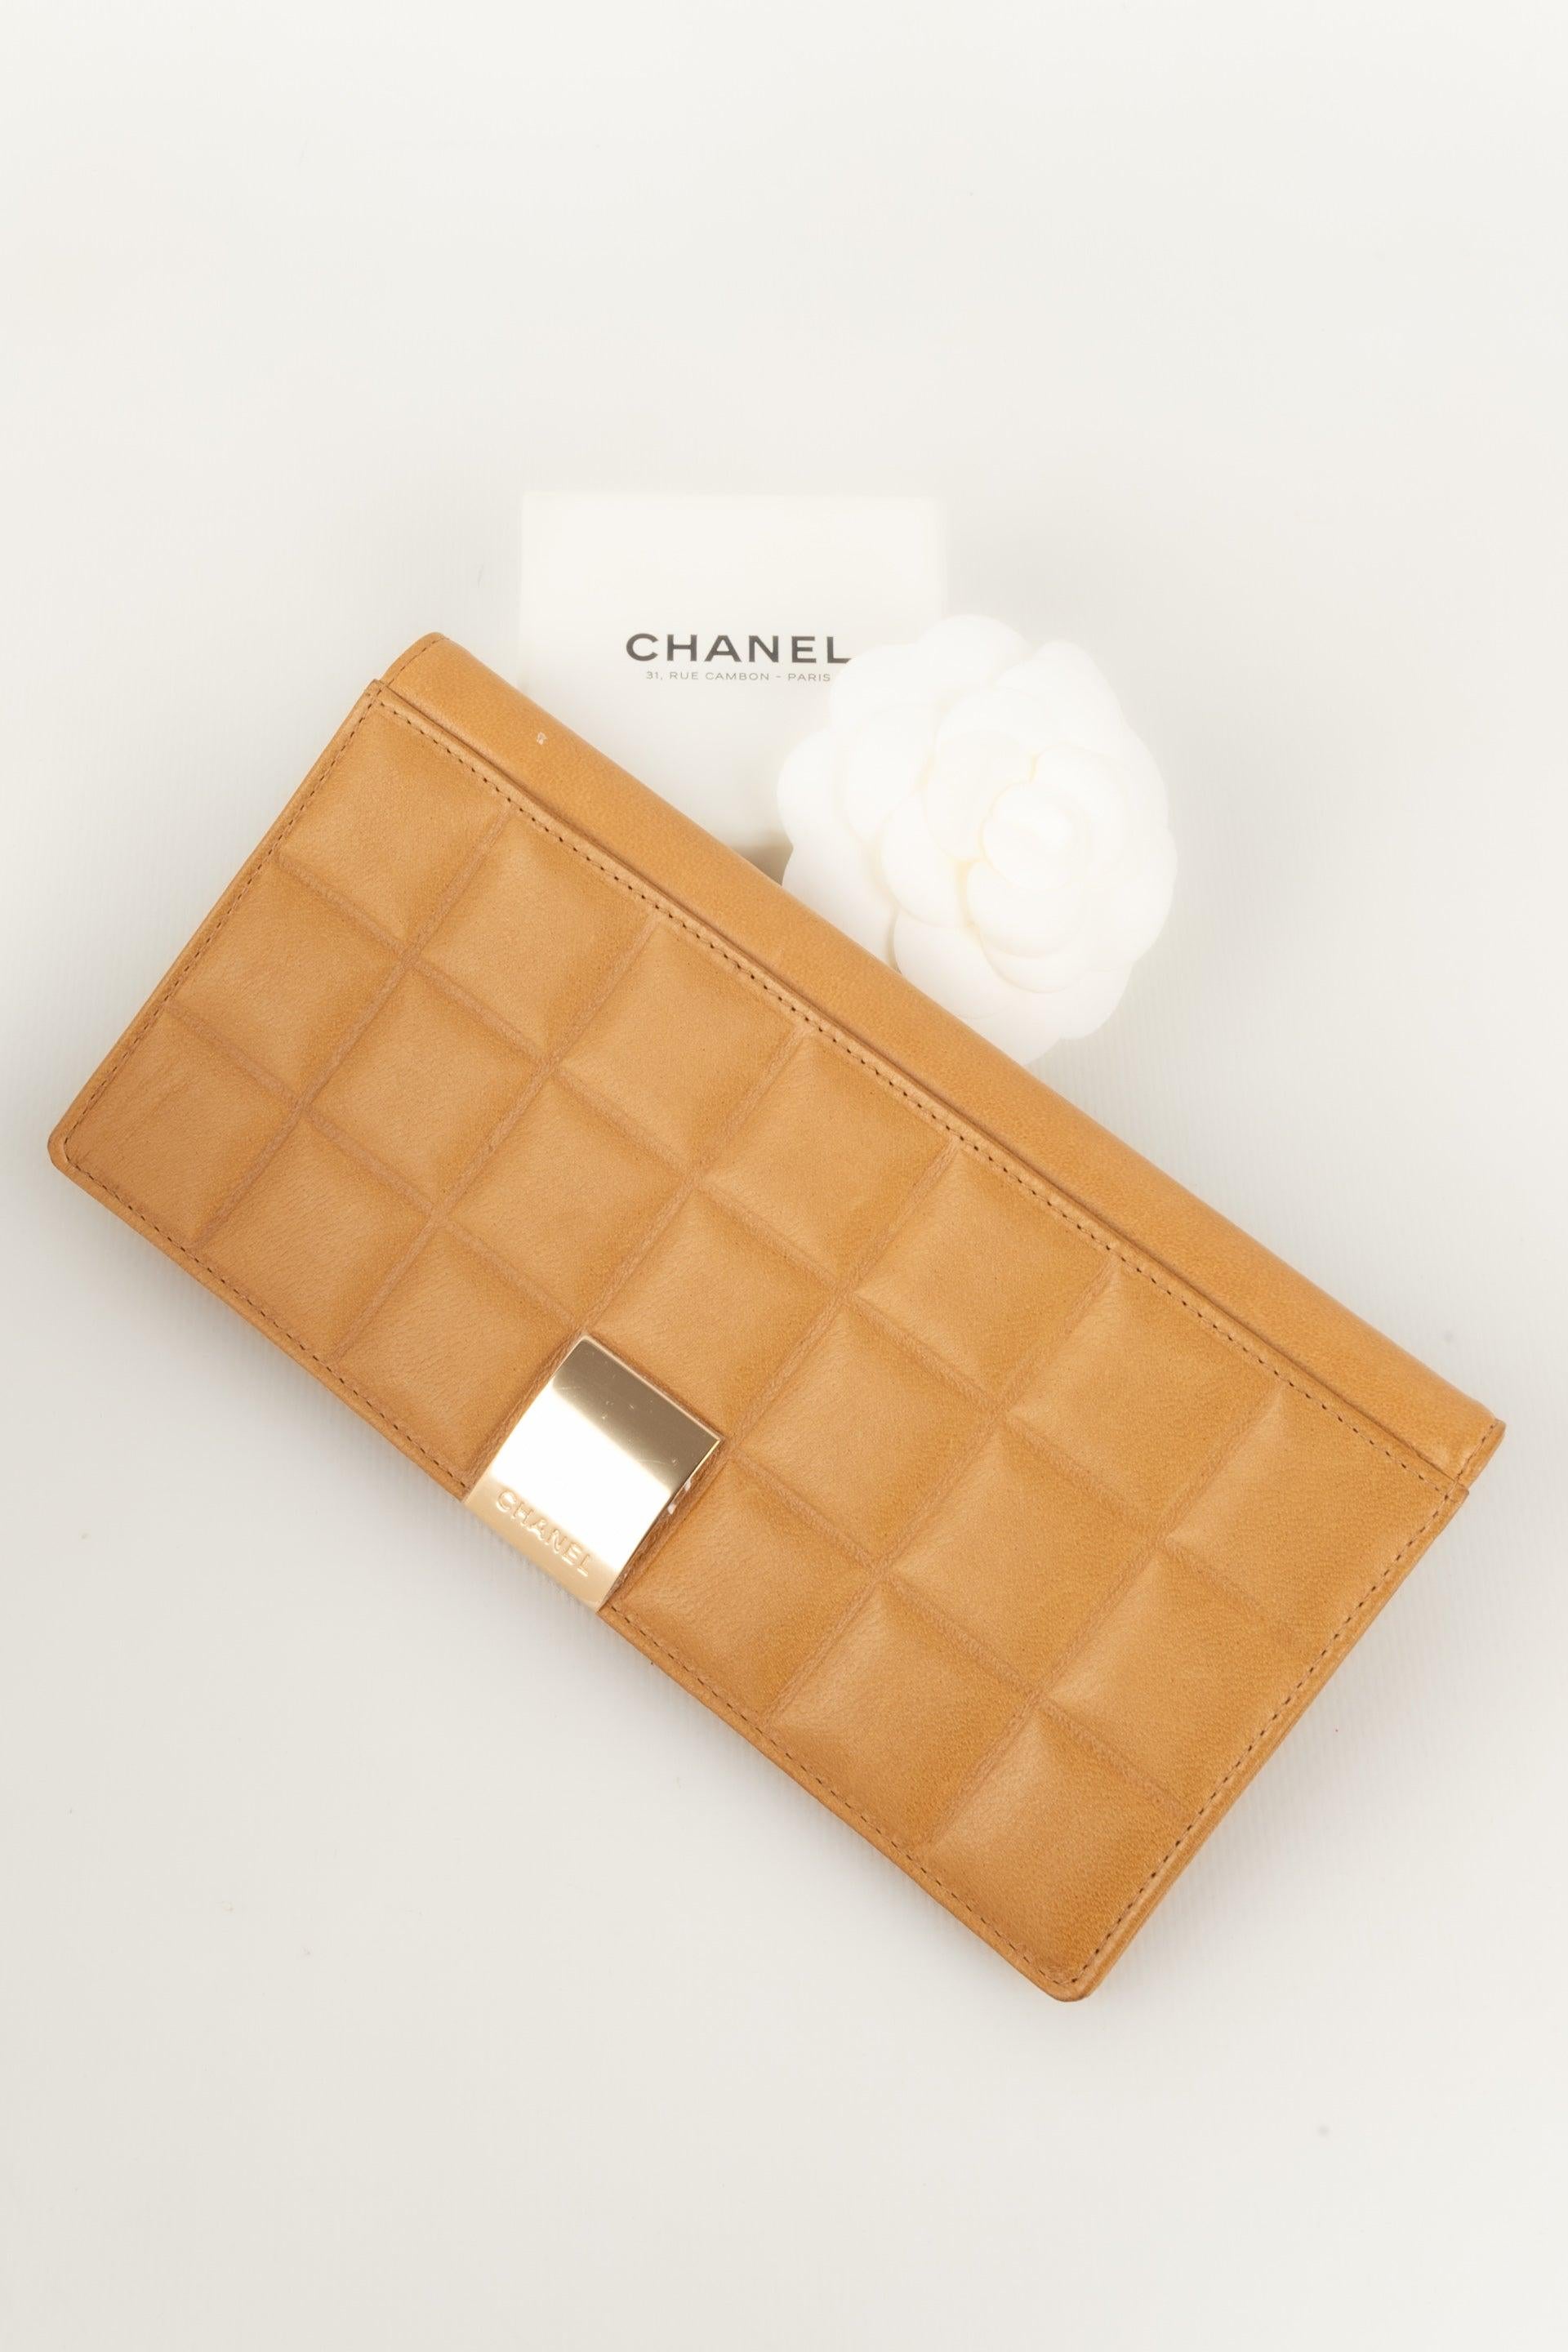 Chanel Golden Metal and Beige Leather Wallet, 2002/2003 For Sale 3